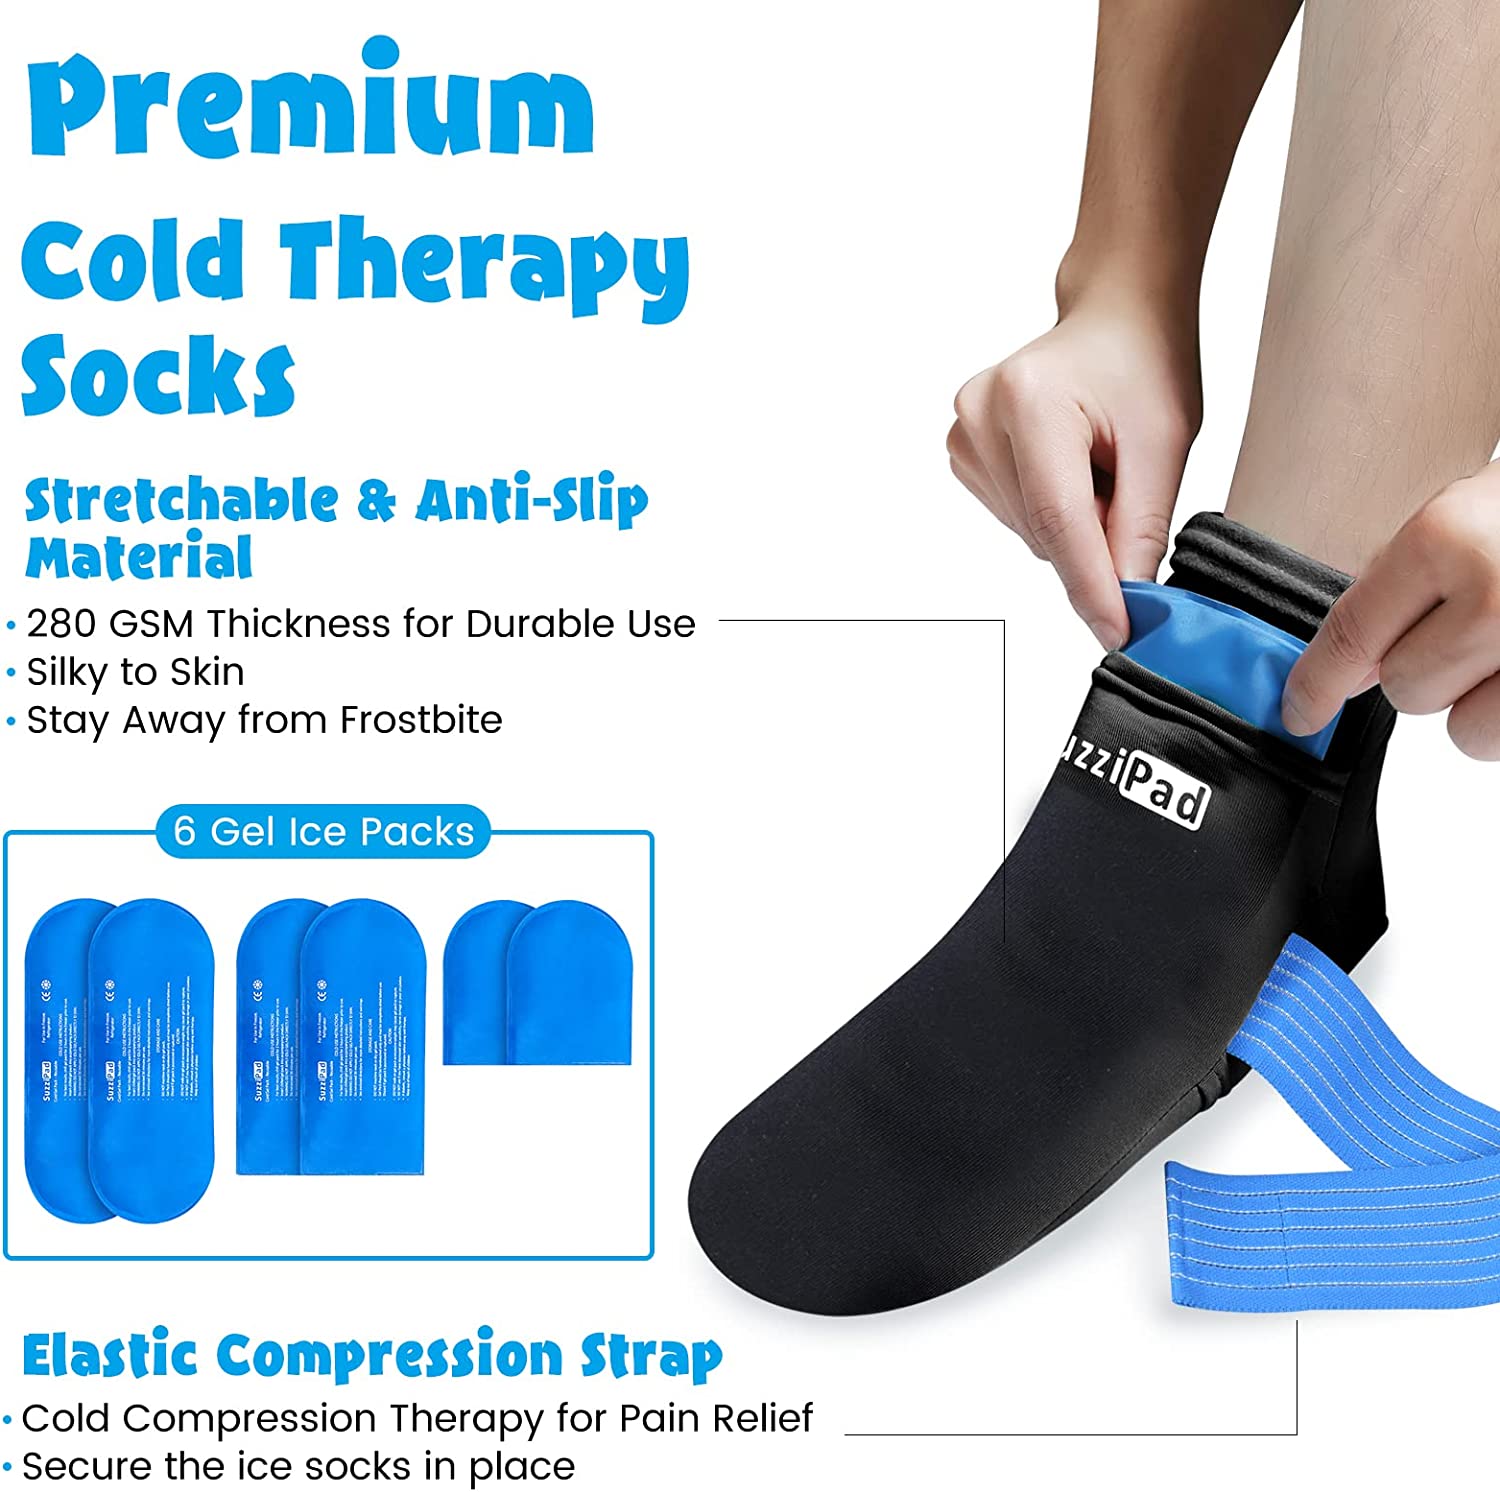  SuzziPad Cold Therapy Socks & Hand Ice Pack, Cold Gloves for  Chemotherapy Neuropathy, Chemo Care Package for Women and Men, Ideal for  Plantar Fasciitis, Carpal Tunnel, Arthritis Foot Pain Relief, S/M 